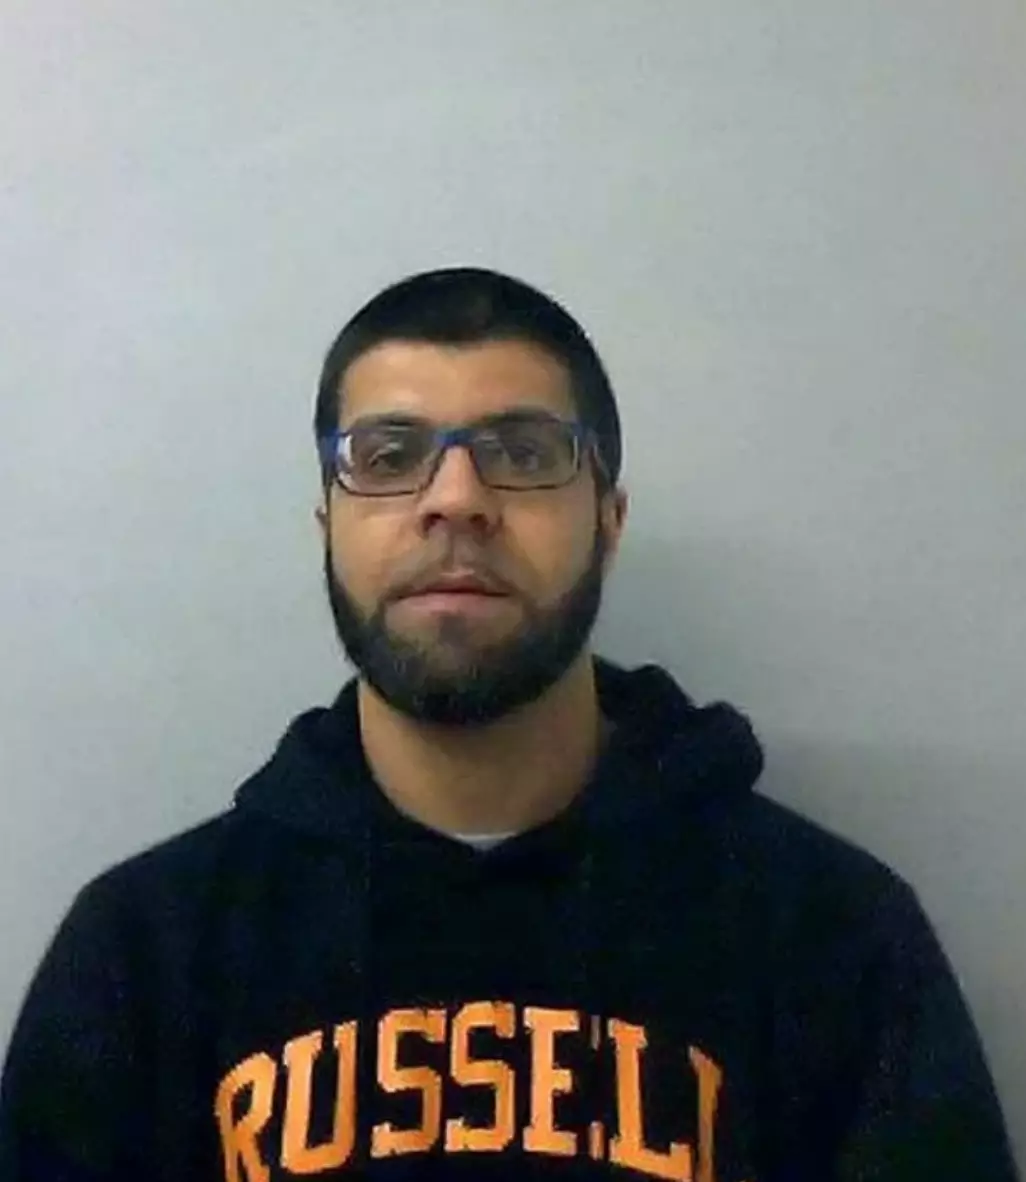 Khalid Hussain was convicted of one rape and one indecent assault.